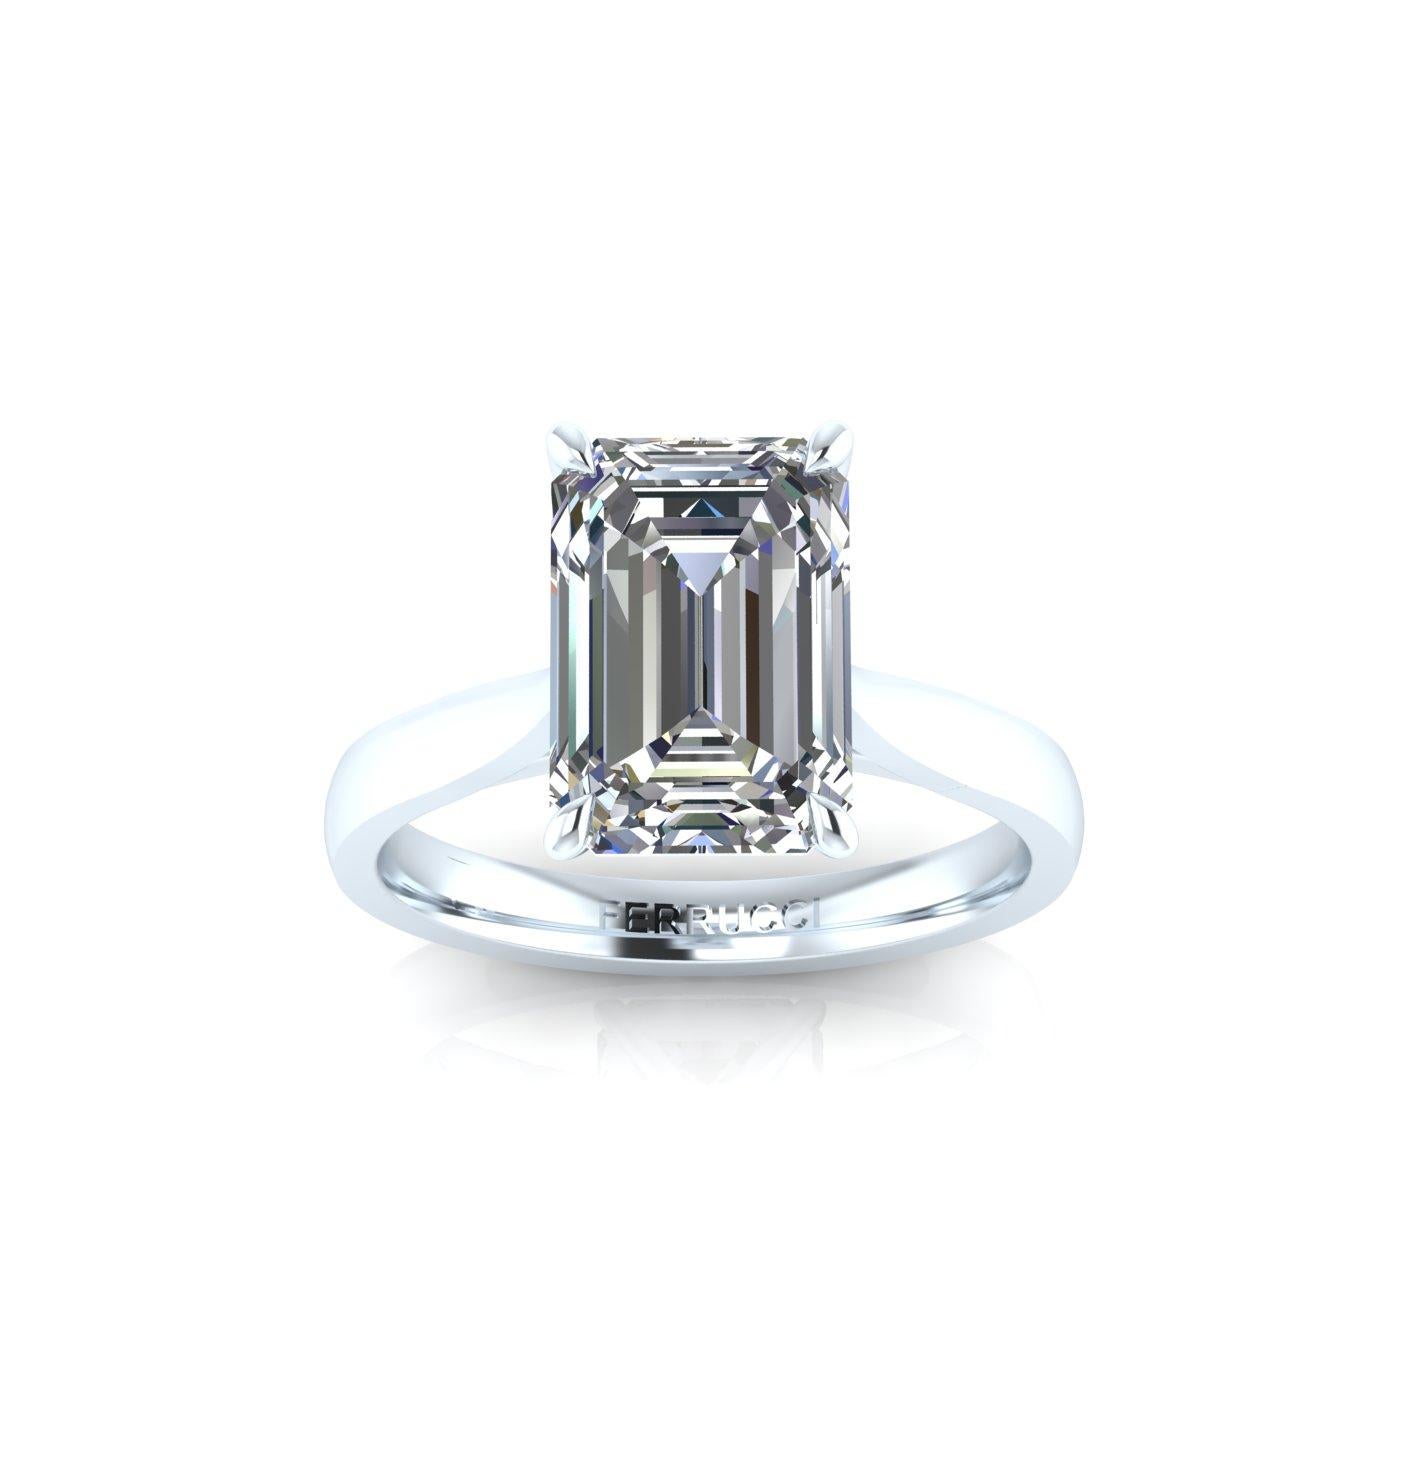 GIA Certified 3.50 carat Emerald step cut diamond, H color,  VS2 clarity, Excellent specs, set in made to fit,  Solitaire Platinum 950 engagement ring setting.
Completely customizable to fit any diamond's shape and size.
The ring size is a 5.75, we